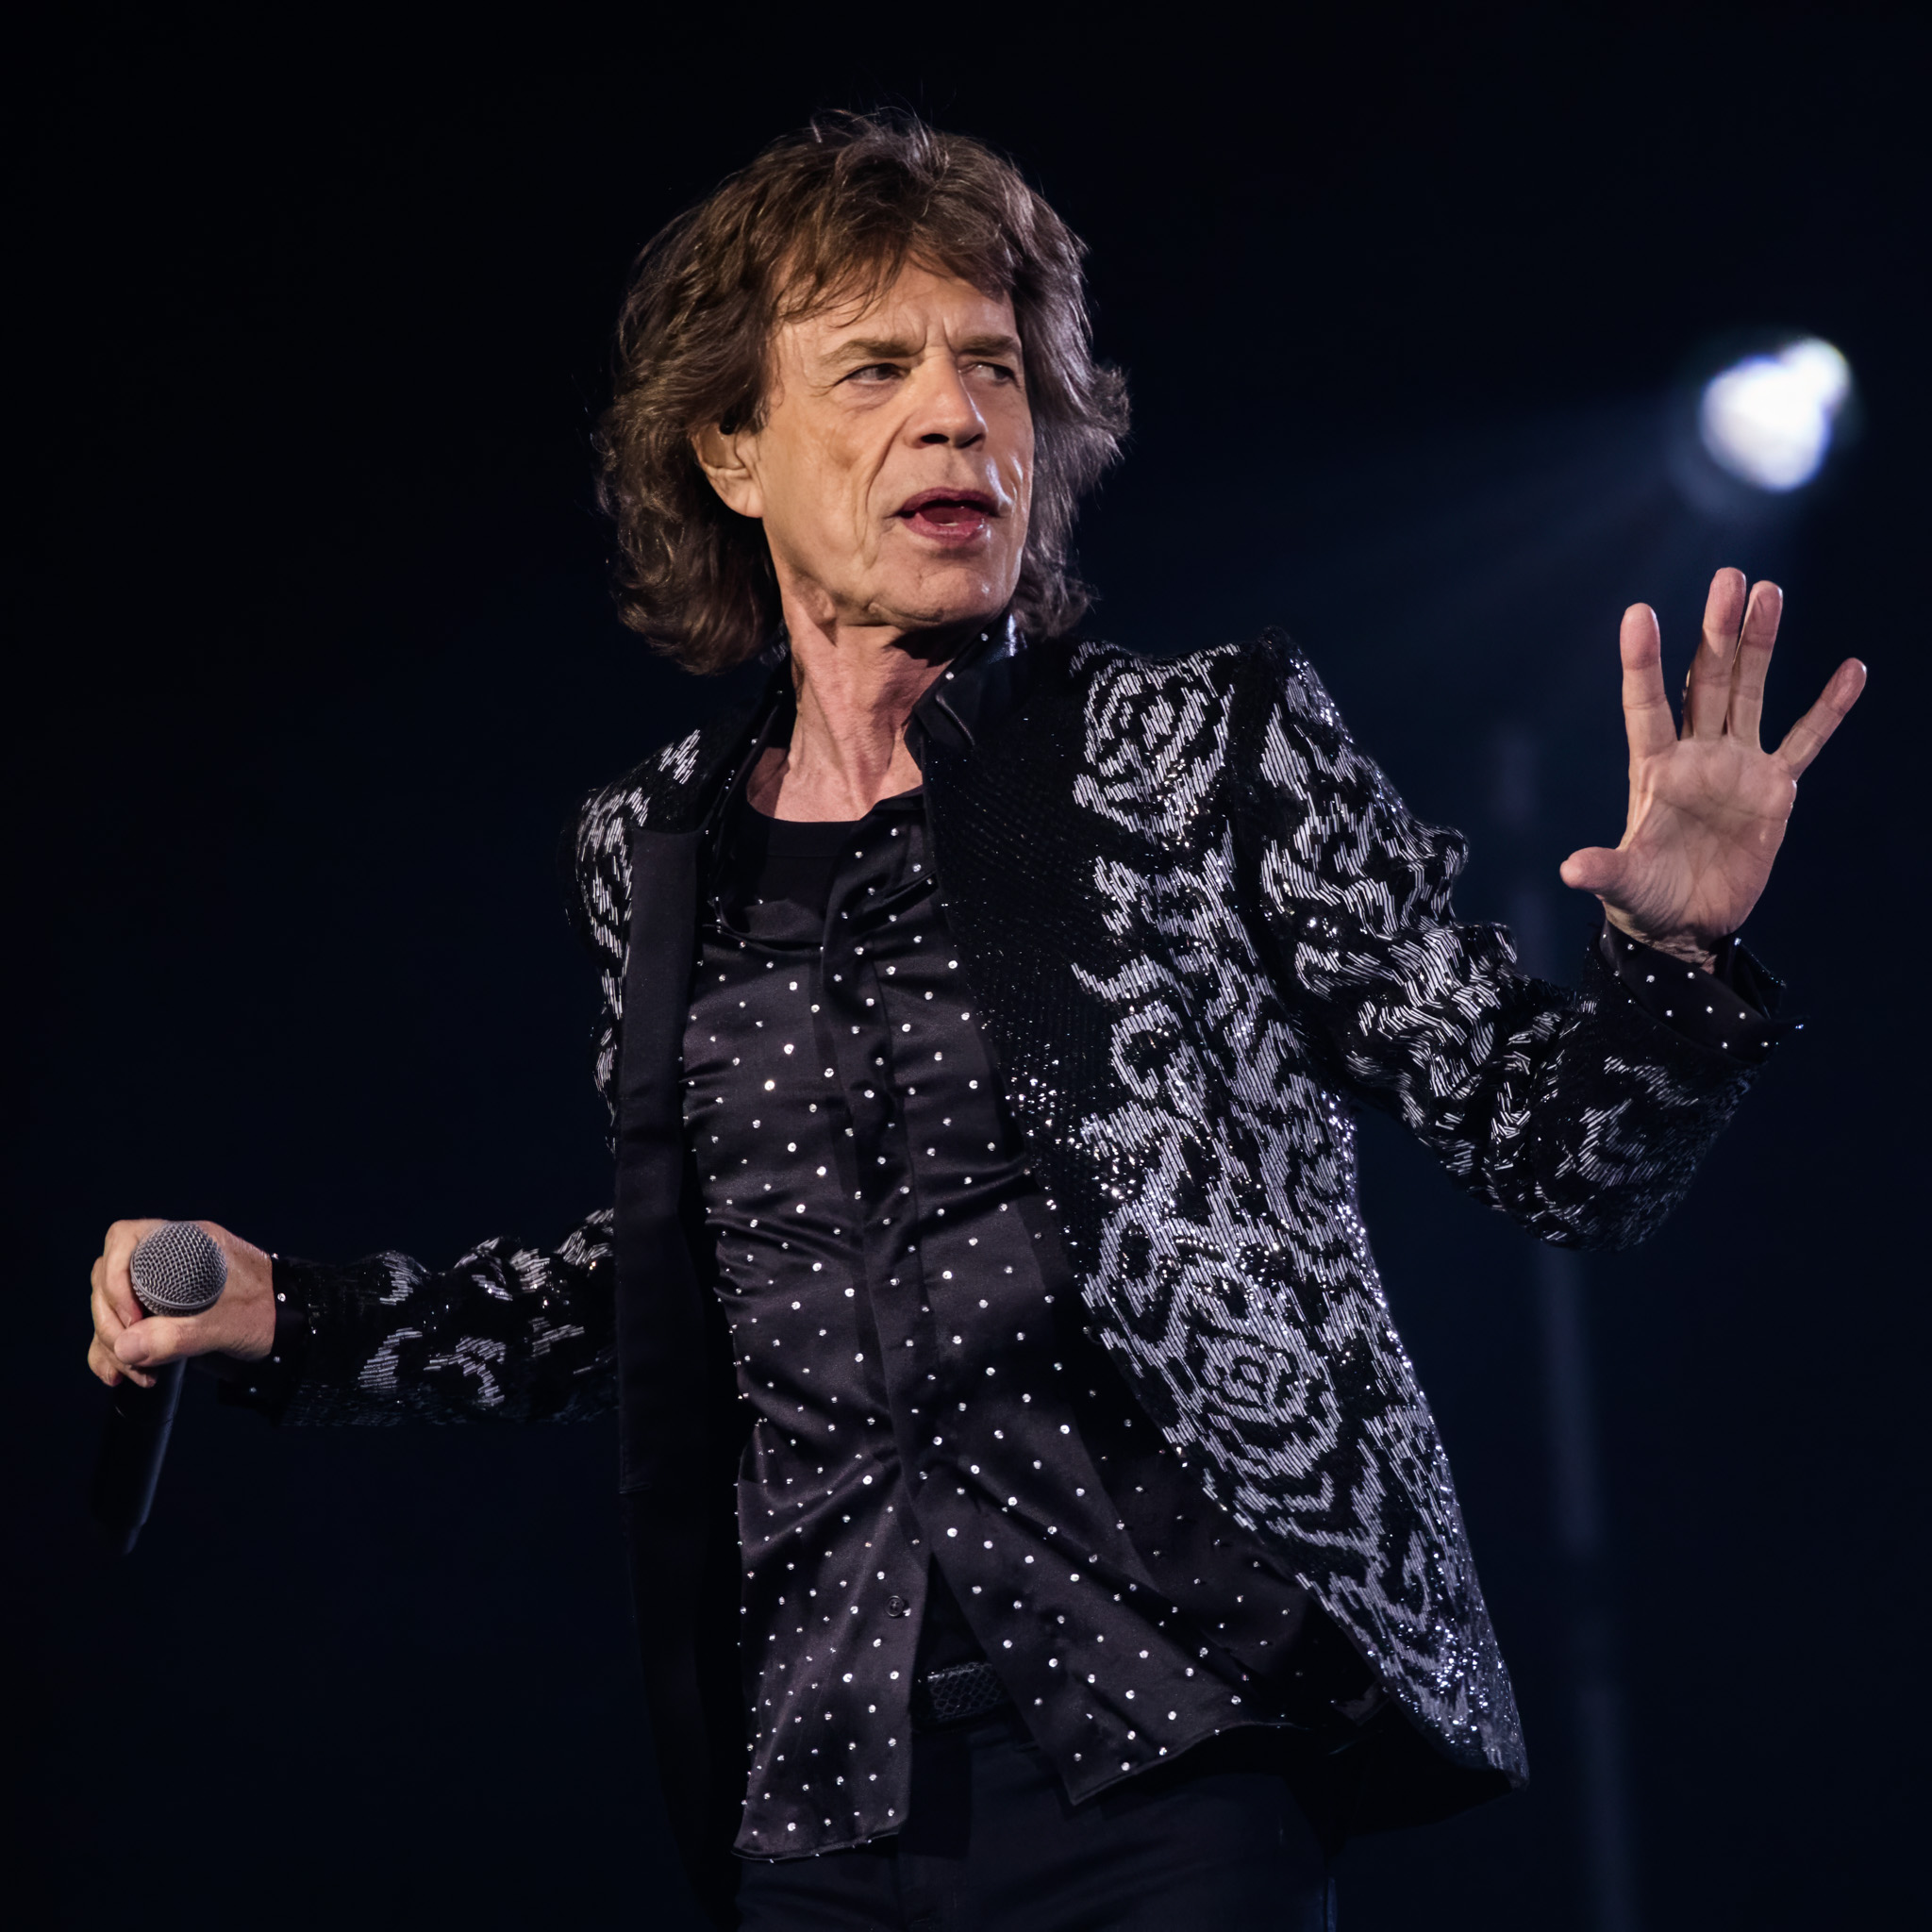 Mick Jagger Rolling Stones by Bullet-ray Photography